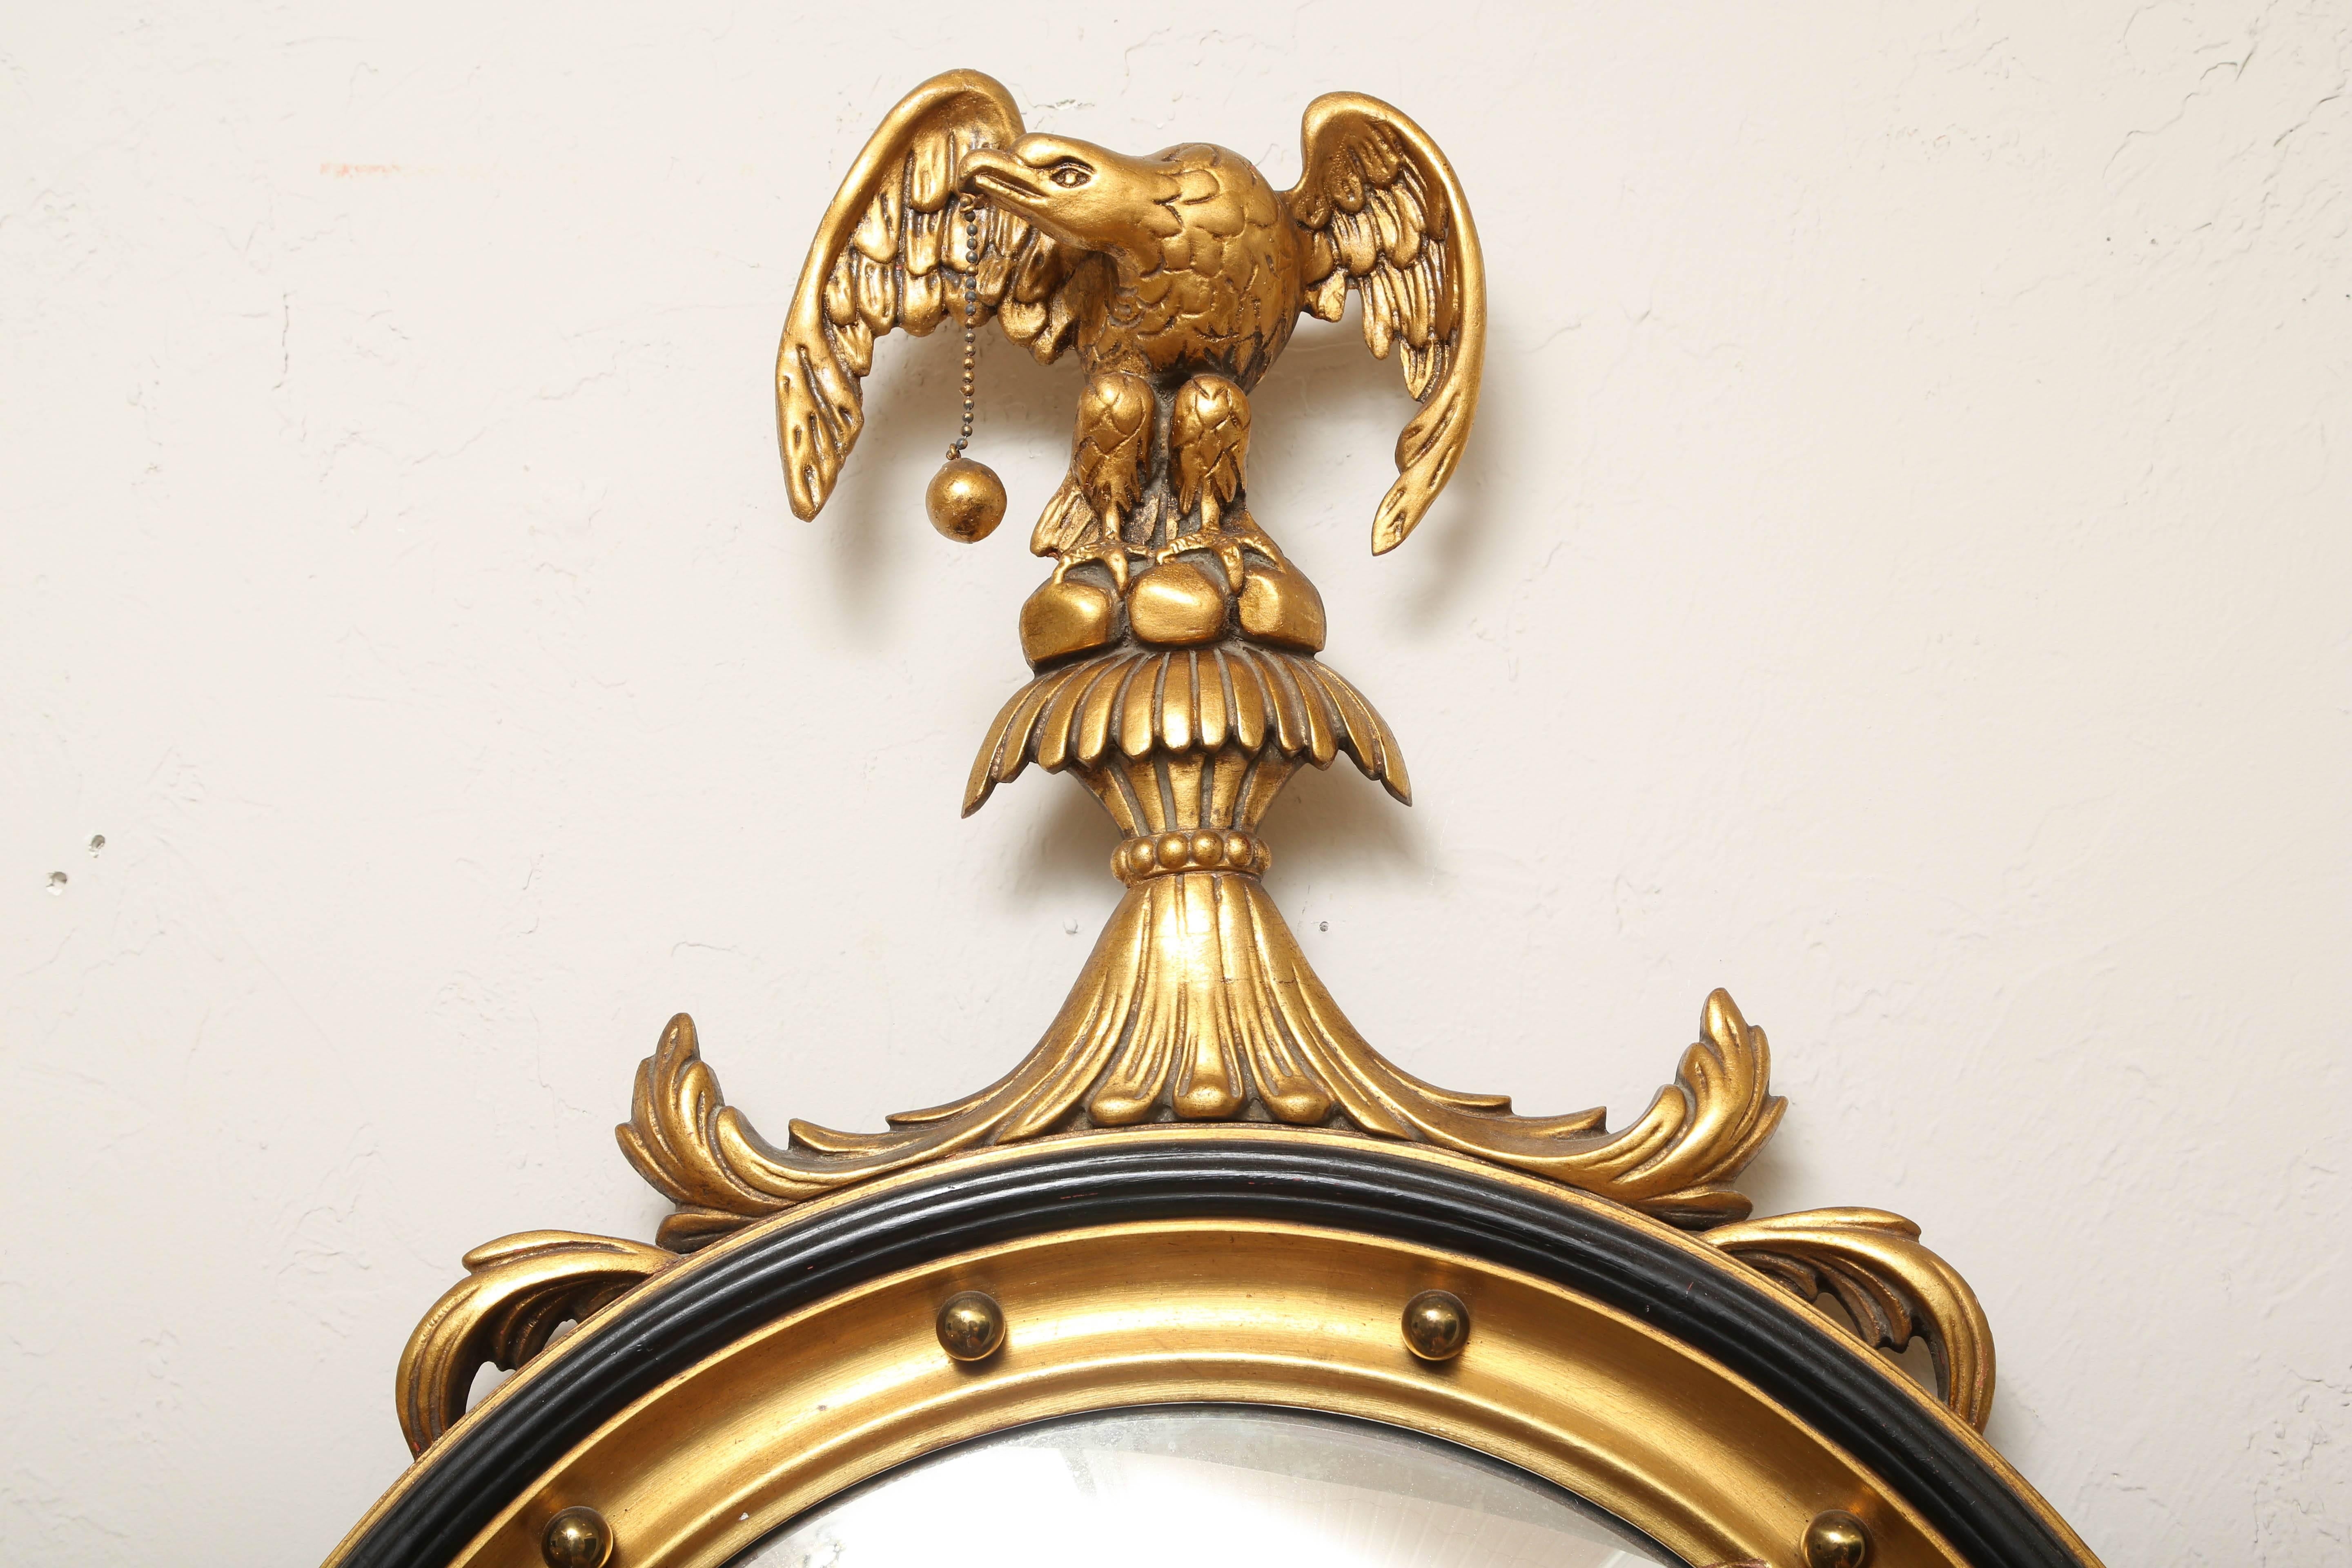 Classical convex gilded mirror with eagle on top.